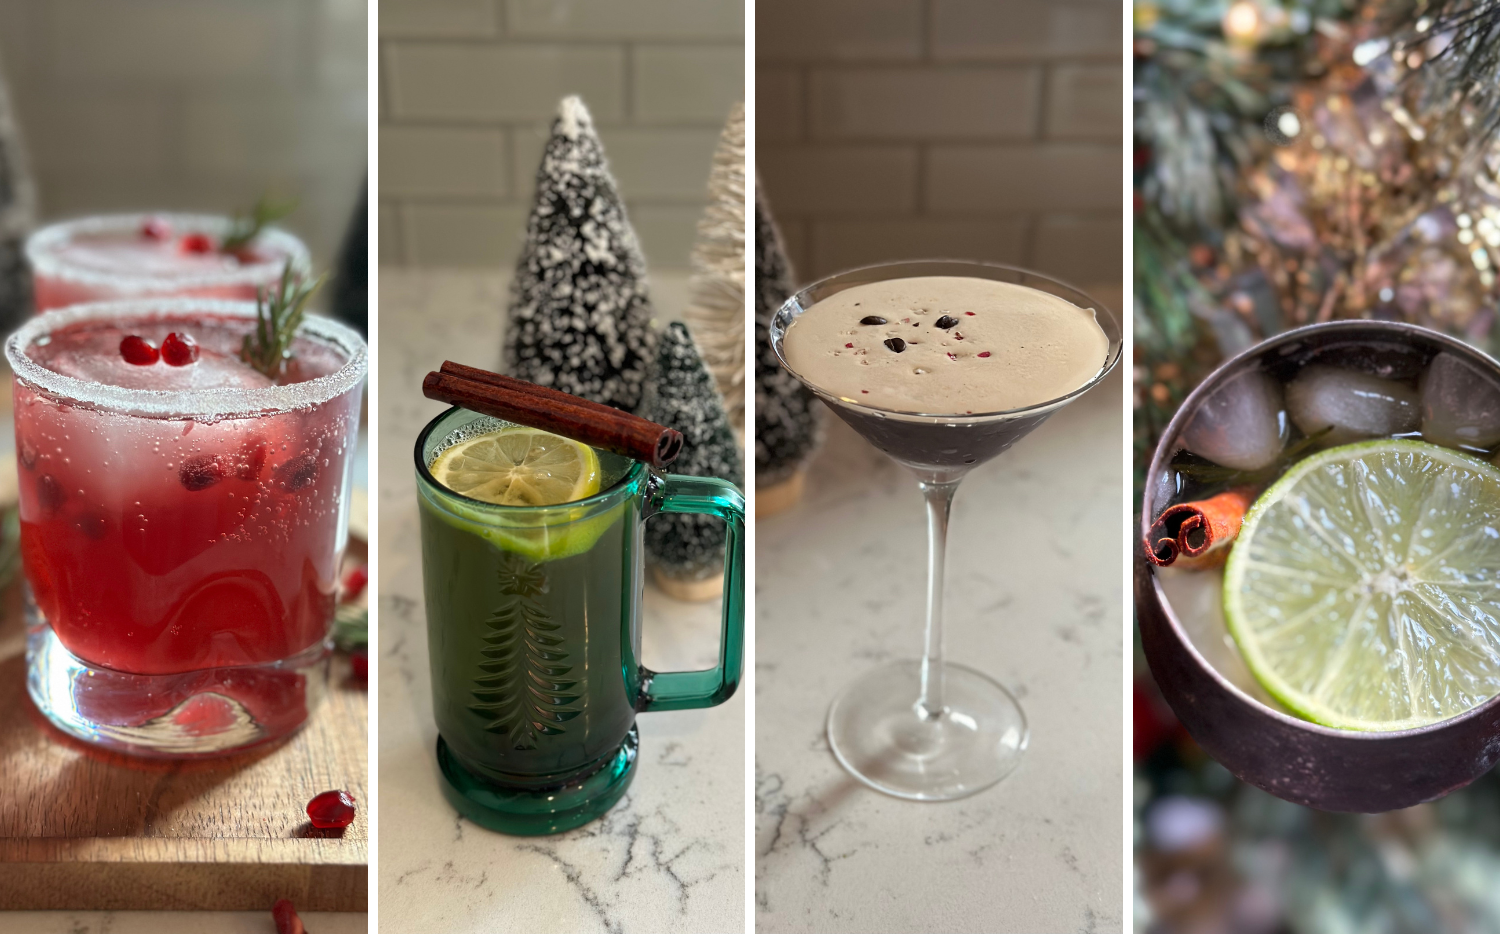 https://www.blogilates.com/wp-content/uploads/2022/12/4-non-alcoholic-holiday-drinks.png